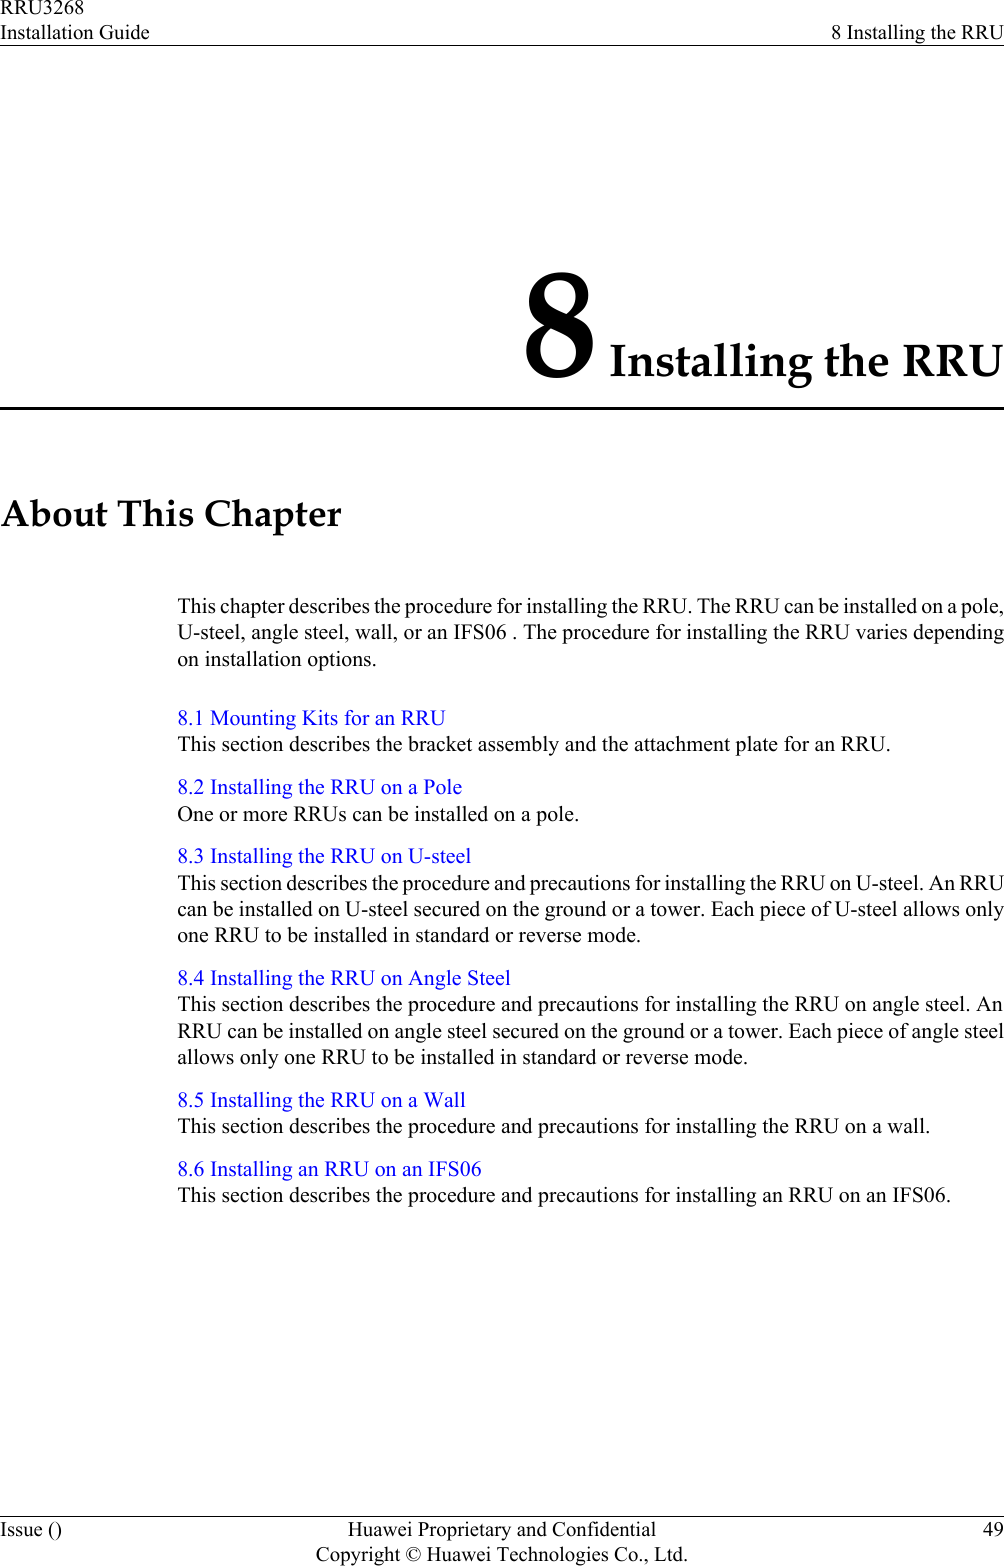 8 Installing the RRUAbout This ChapterThis chapter describes the procedure for installing the RRU. The RRU can be installed on a pole,U-steel, angle steel, wall, or an IFS06 . The procedure for installing the RRU varies dependingon installation options.8.1 Mounting Kits for an RRUThis section describes the bracket assembly and the attachment plate for an RRU.8.2 Installing the RRU on a PoleOne or more RRUs can be installed on a pole.8.3 Installing the RRU on U-steelThis section describes the procedure and precautions for installing the RRU on U-steel. An RRUcan be installed on U-steel secured on the ground or a tower. Each piece of U-steel allows onlyone RRU to be installed in standard or reverse mode.8.4 Installing the RRU on Angle SteelThis section describes the procedure and precautions for installing the RRU on angle steel. AnRRU can be installed on angle steel secured on the ground or a tower. Each piece of angle steelallows only one RRU to be installed in standard or reverse mode.8.5 Installing the RRU on a WallThis section describes the procedure and precautions for installing the RRU on a wall.8.6 Installing an RRU on an IFS06This section describes the procedure and precautions for installing an RRU on an IFS06.RRU3268Installation Guide 8 Installing the RRUIssue () Huawei Proprietary and ConfidentialCopyright © Huawei Technologies Co., Ltd.49